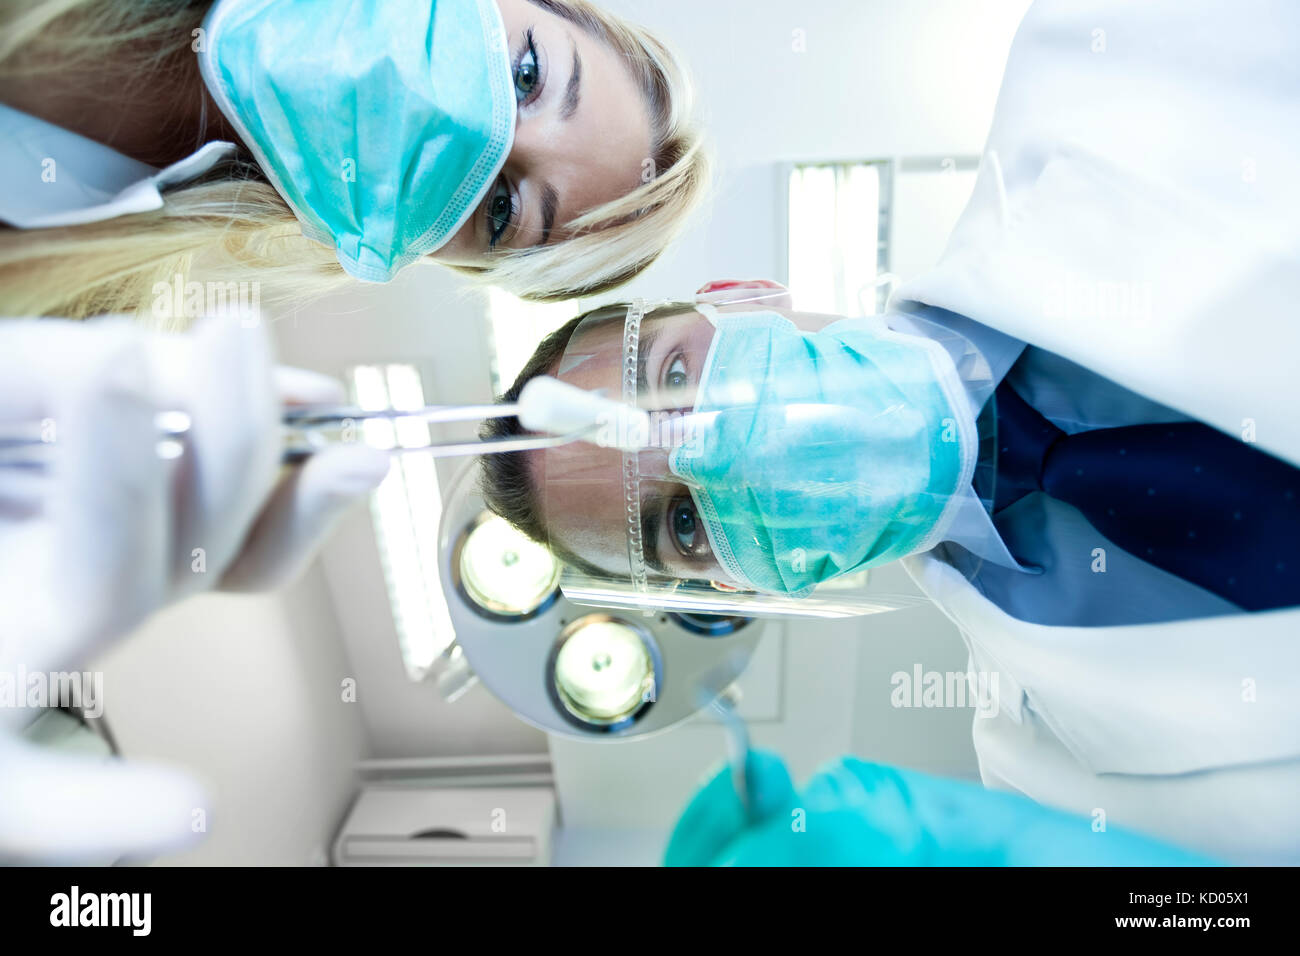 Dental team working with a patient in protective work wear Stock Photo